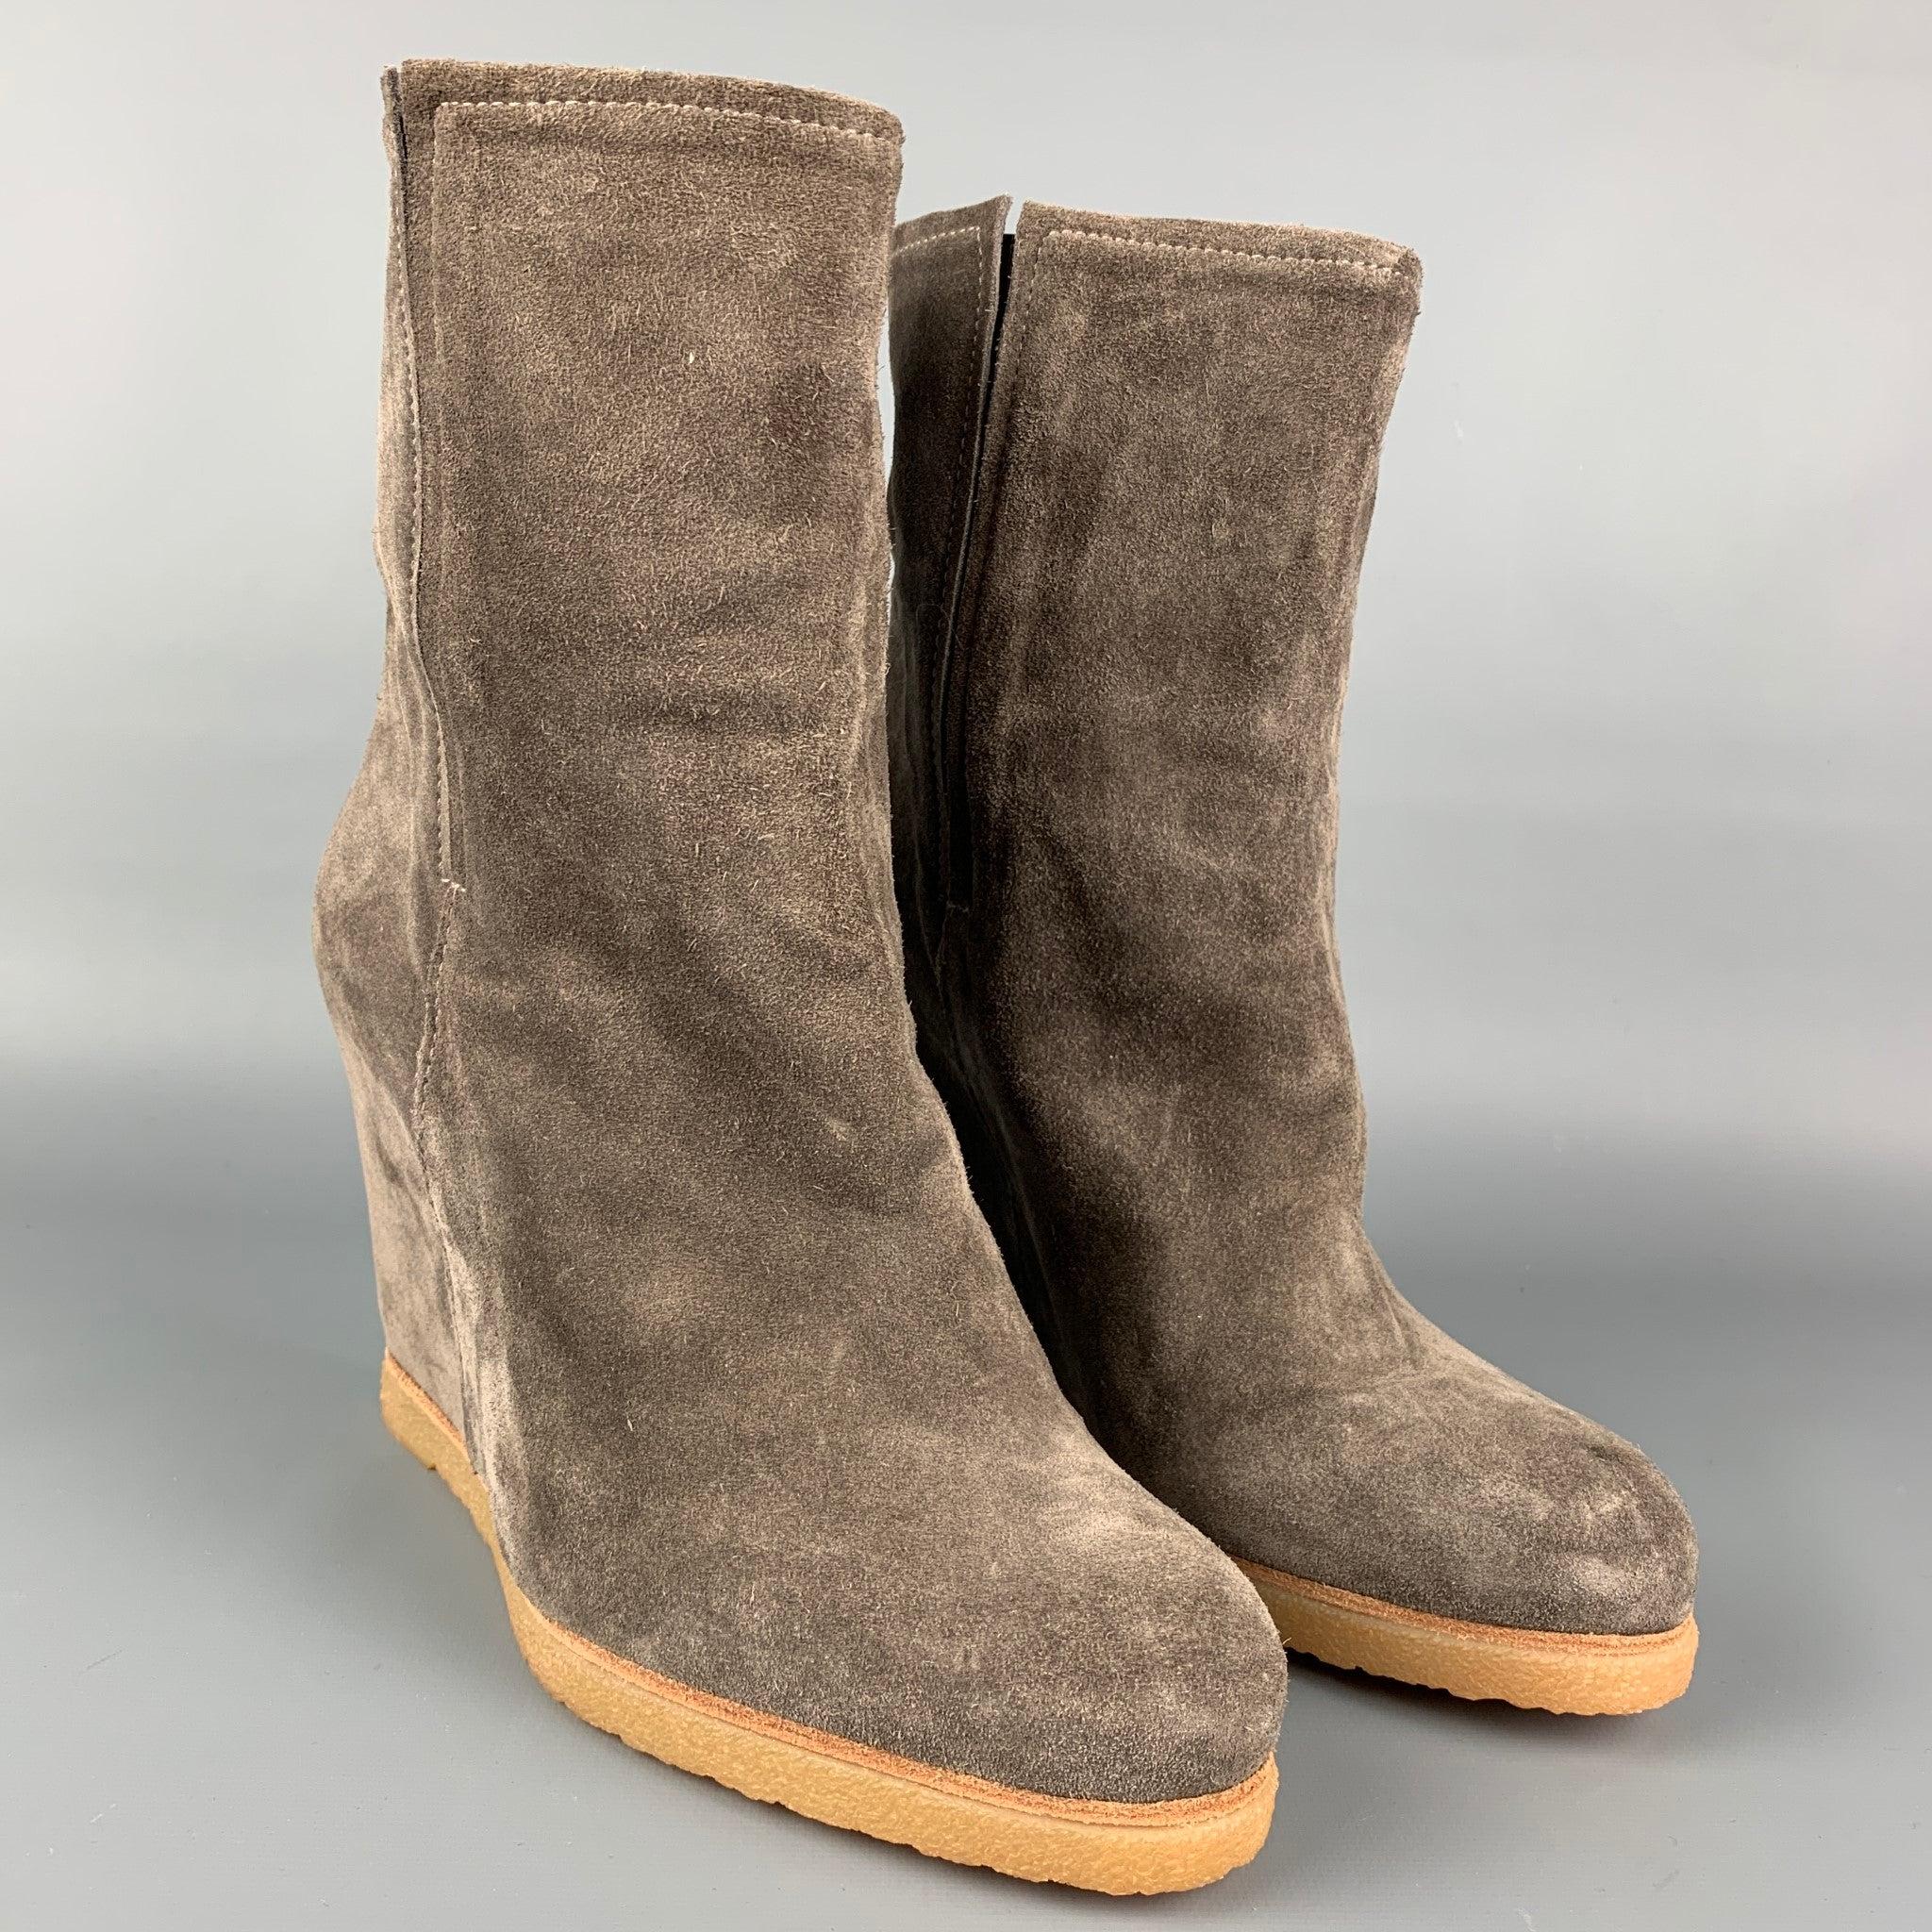 STUART WEITZMAN boots comes in a taupe suede featuring a elastic panel and a wedge heel.
Very Good
Pre-Owned Condition. 

Measurements: 
  Heel: 4.5 inches 
  
  
 
Reference: 106156
Category: Boots
More Details
    
Brand:  STUART WEITZMAN
Size: 